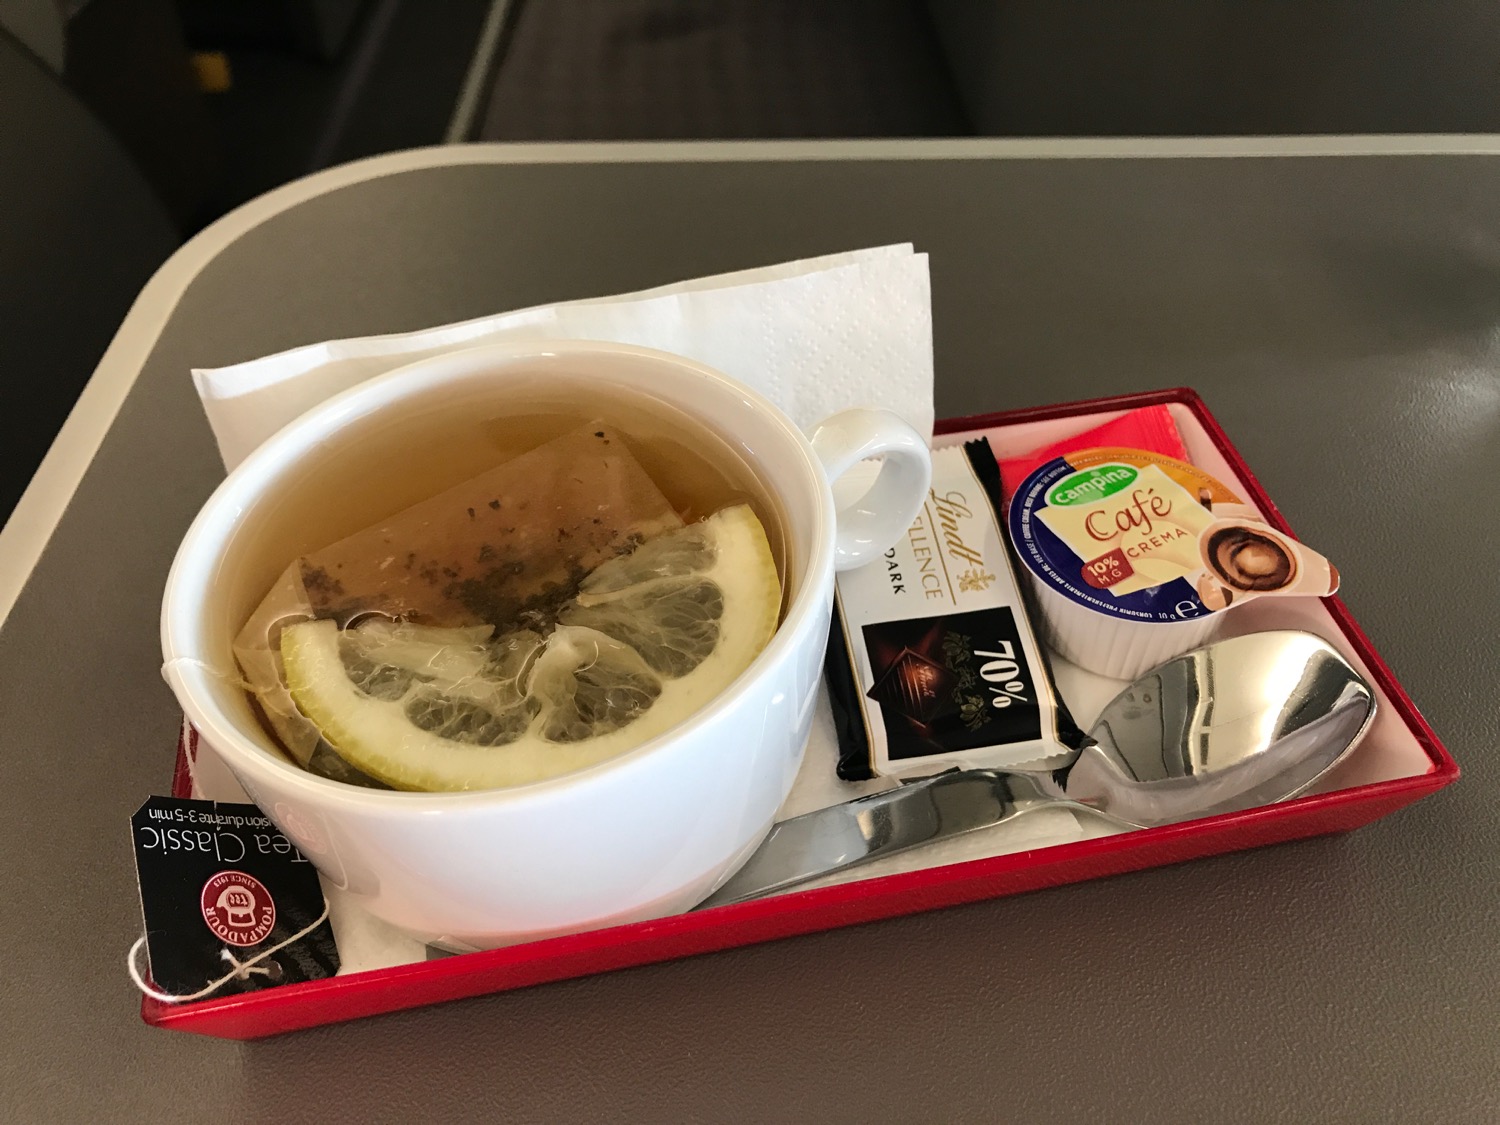 a cup of tea with lemon slices and a spoon on a tray